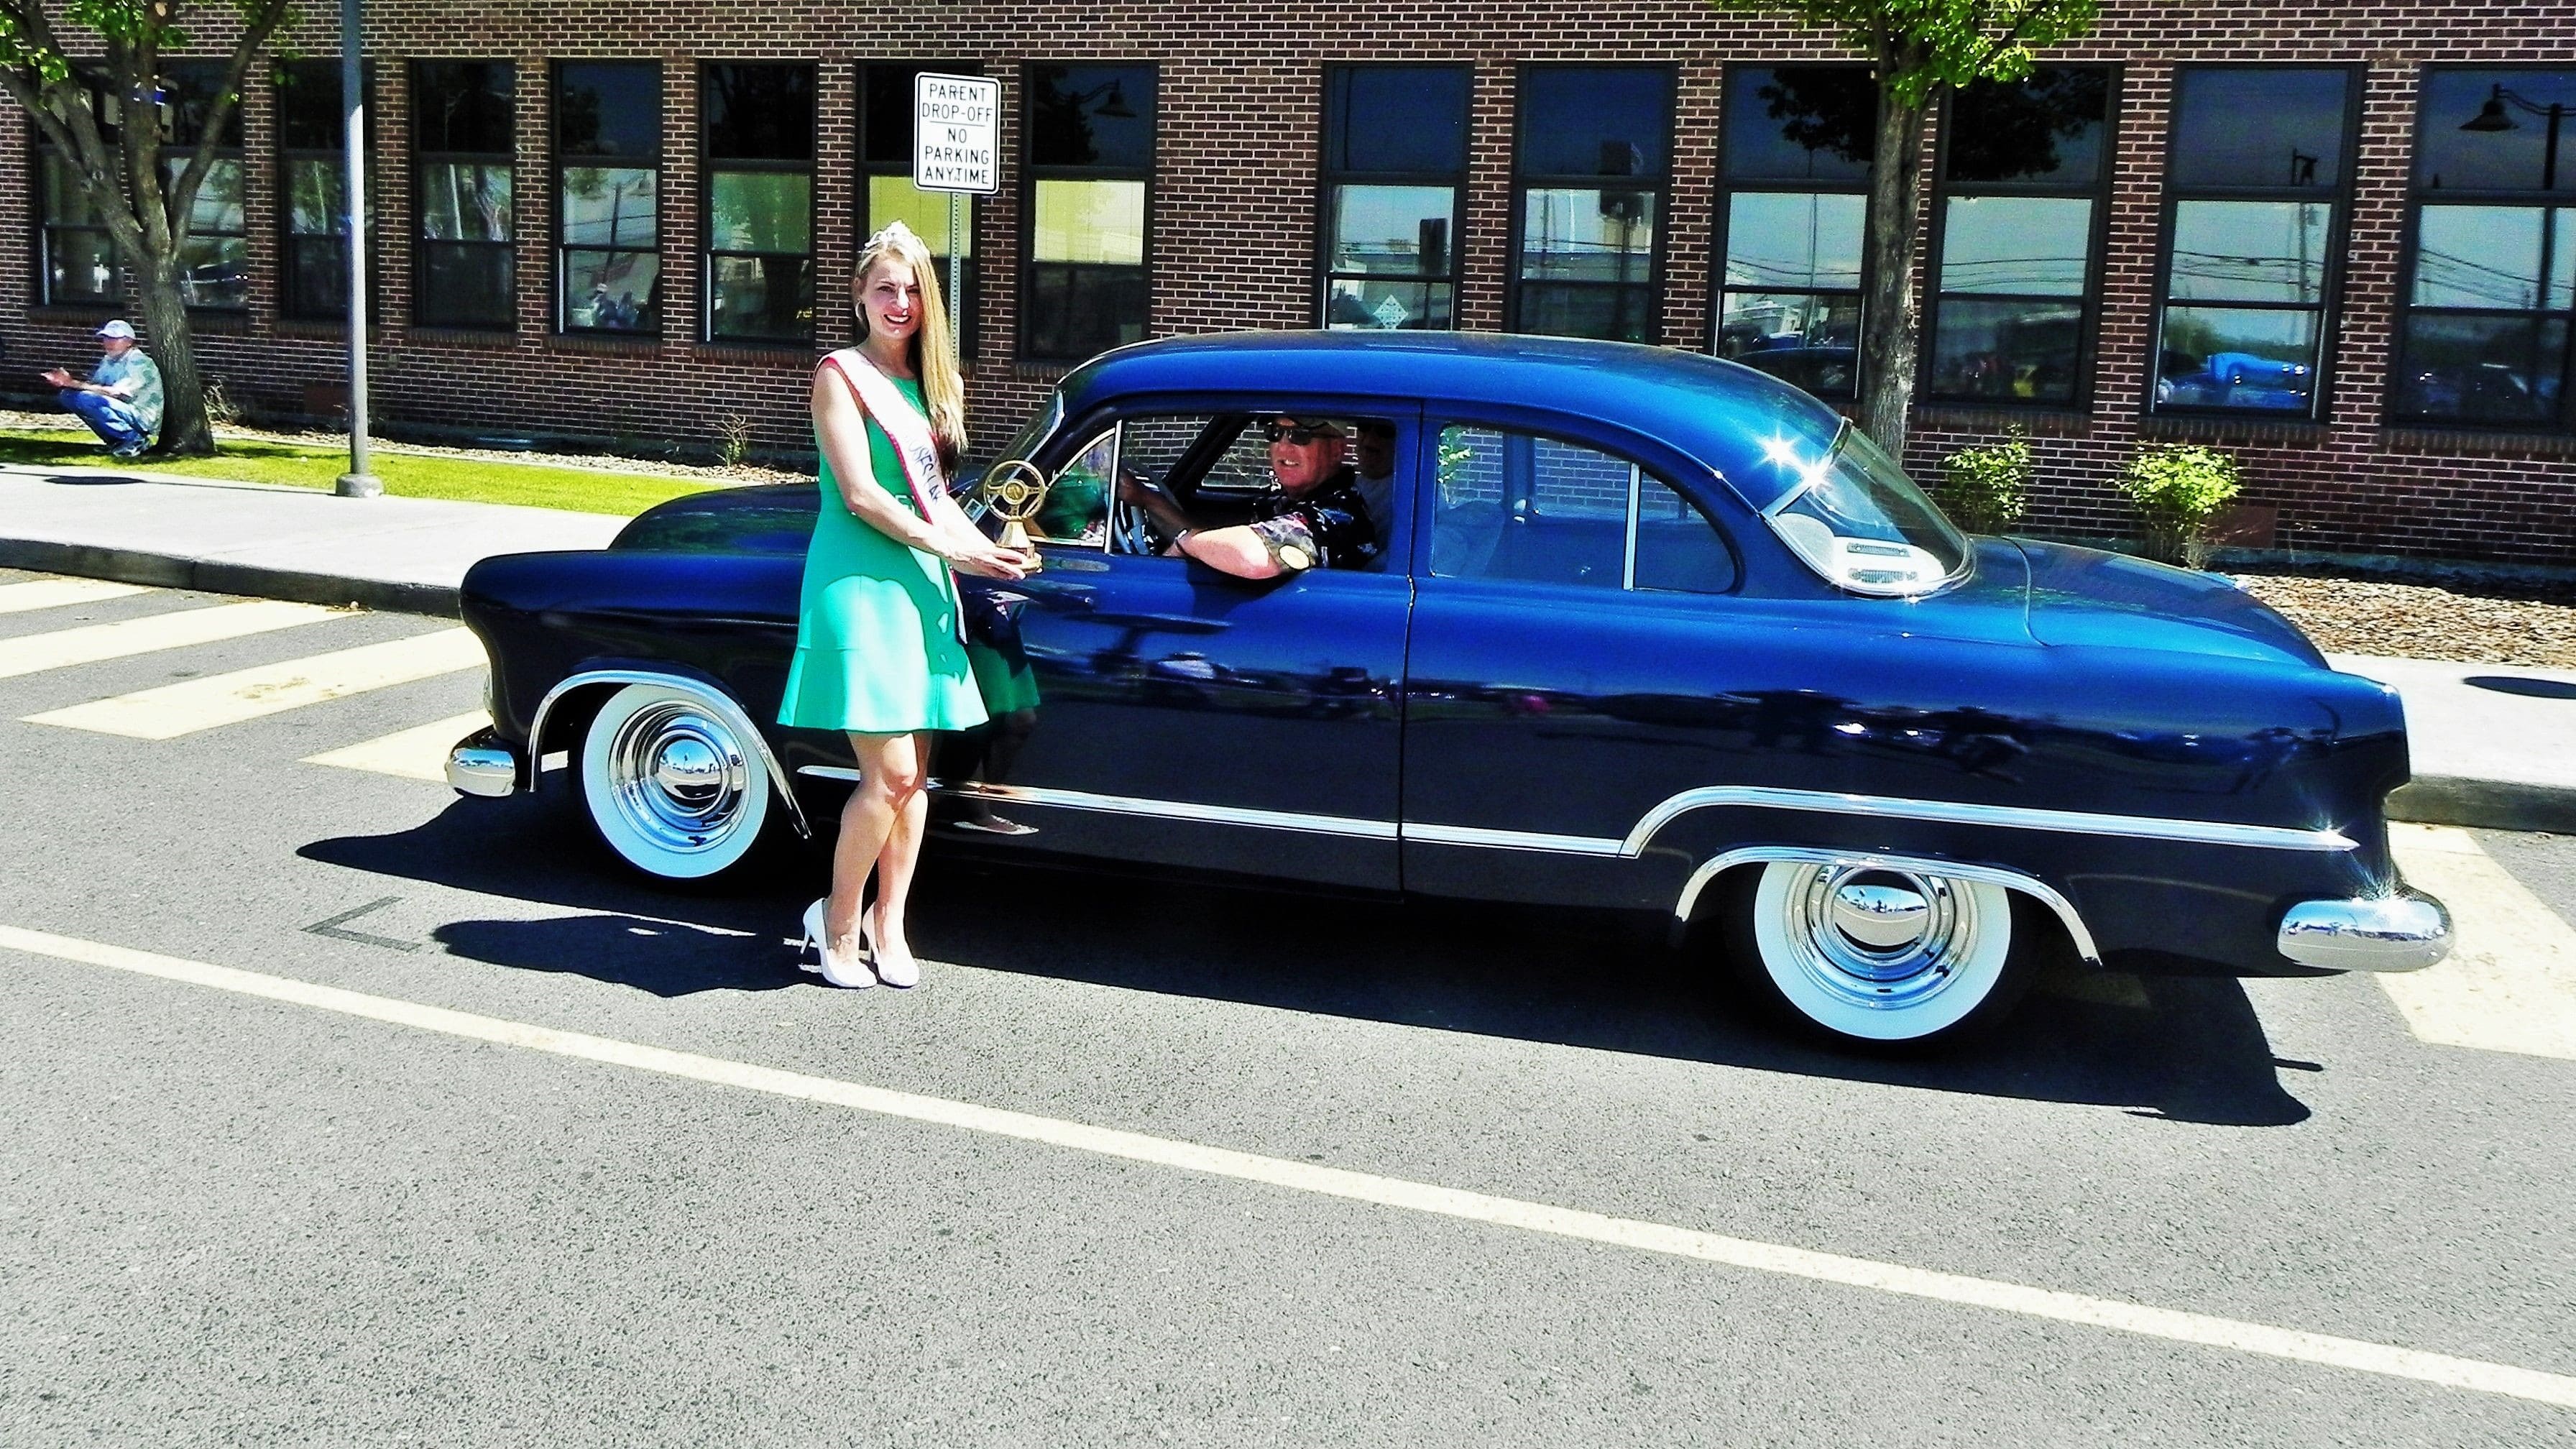 1953 Dodge Meadowbrook - Cops With Cancer - Bruce & Sherrie Tracte